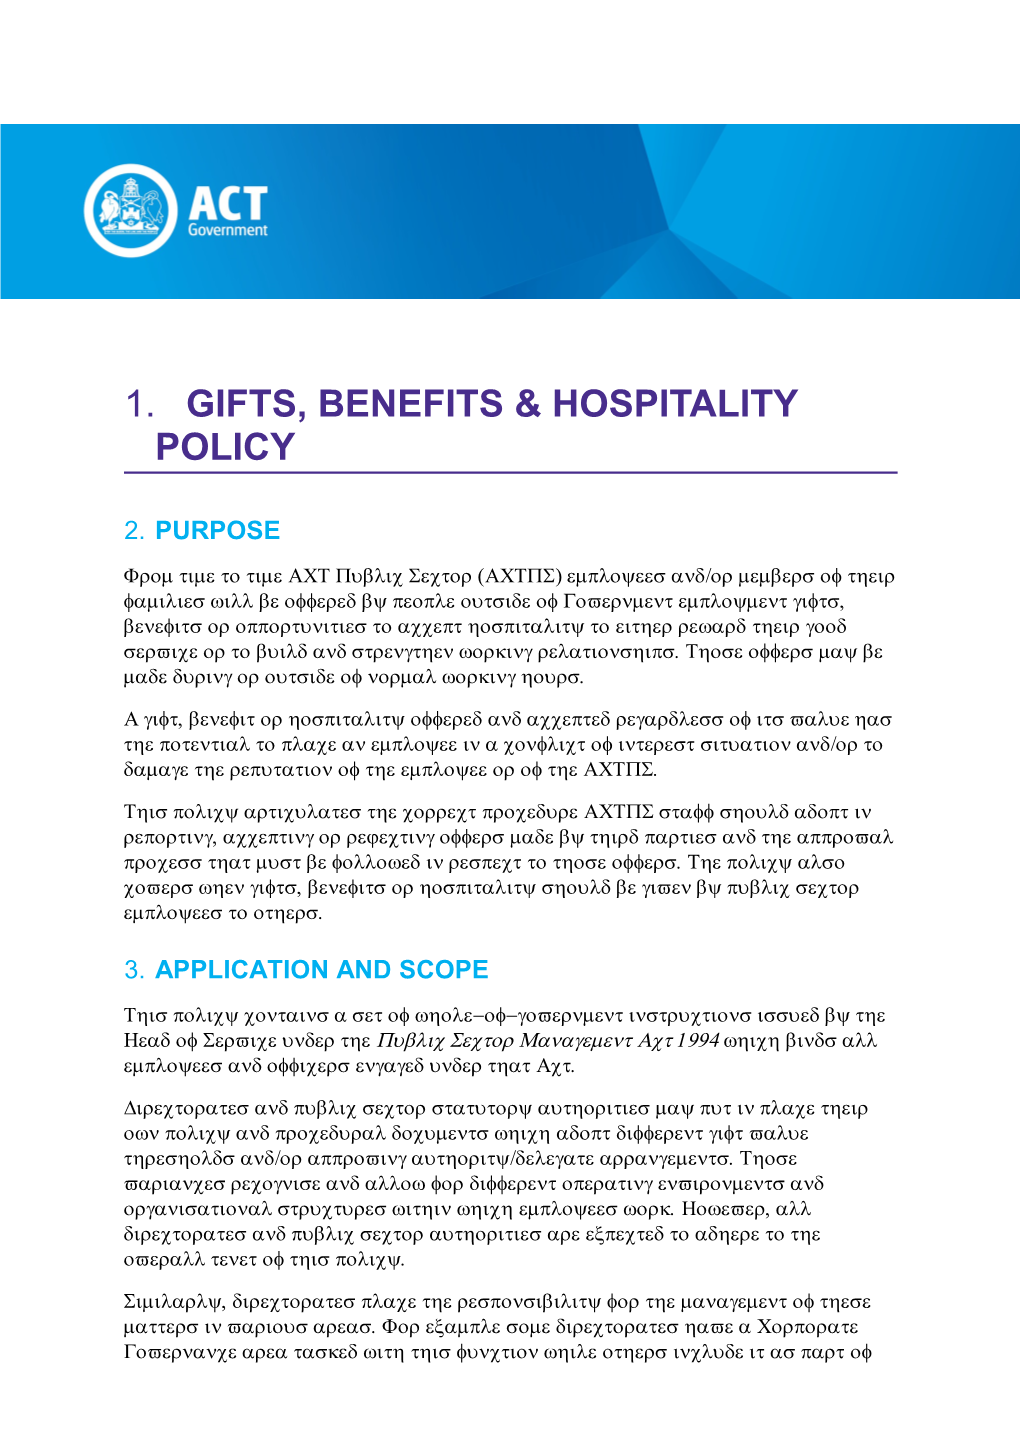 Gifts, Benefits and Hospitality Policy